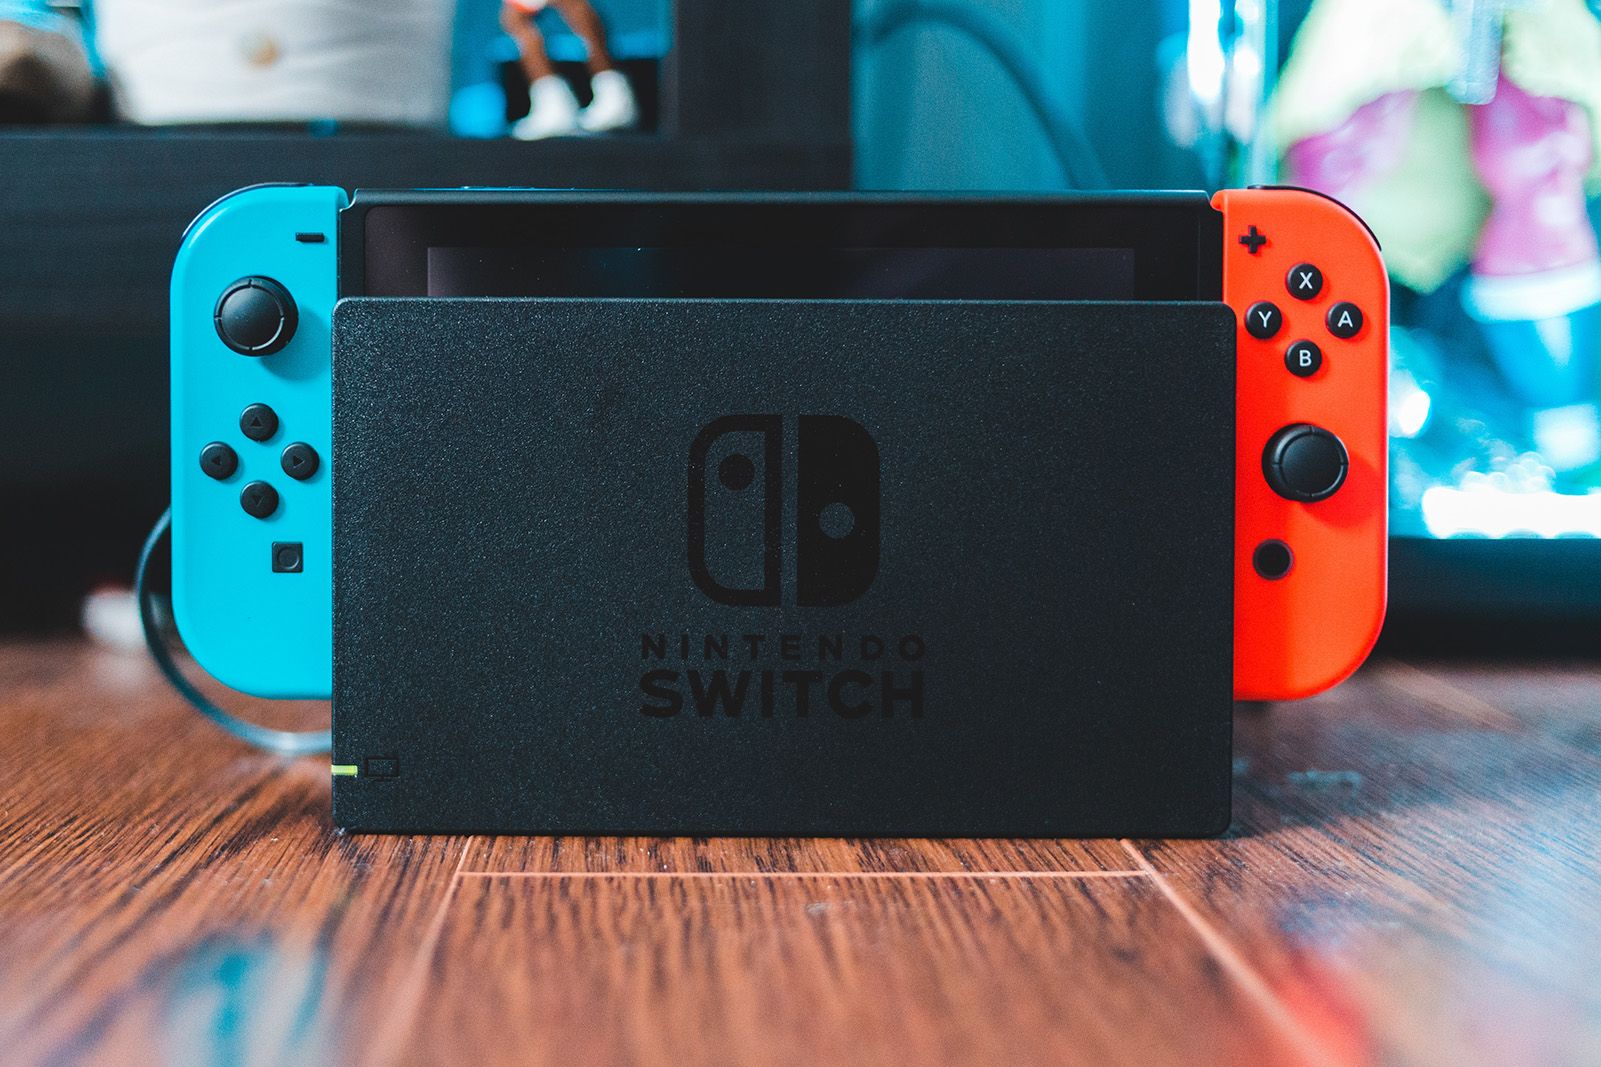 Nintendo Switch Pro dock could contain 4K chip photo 1